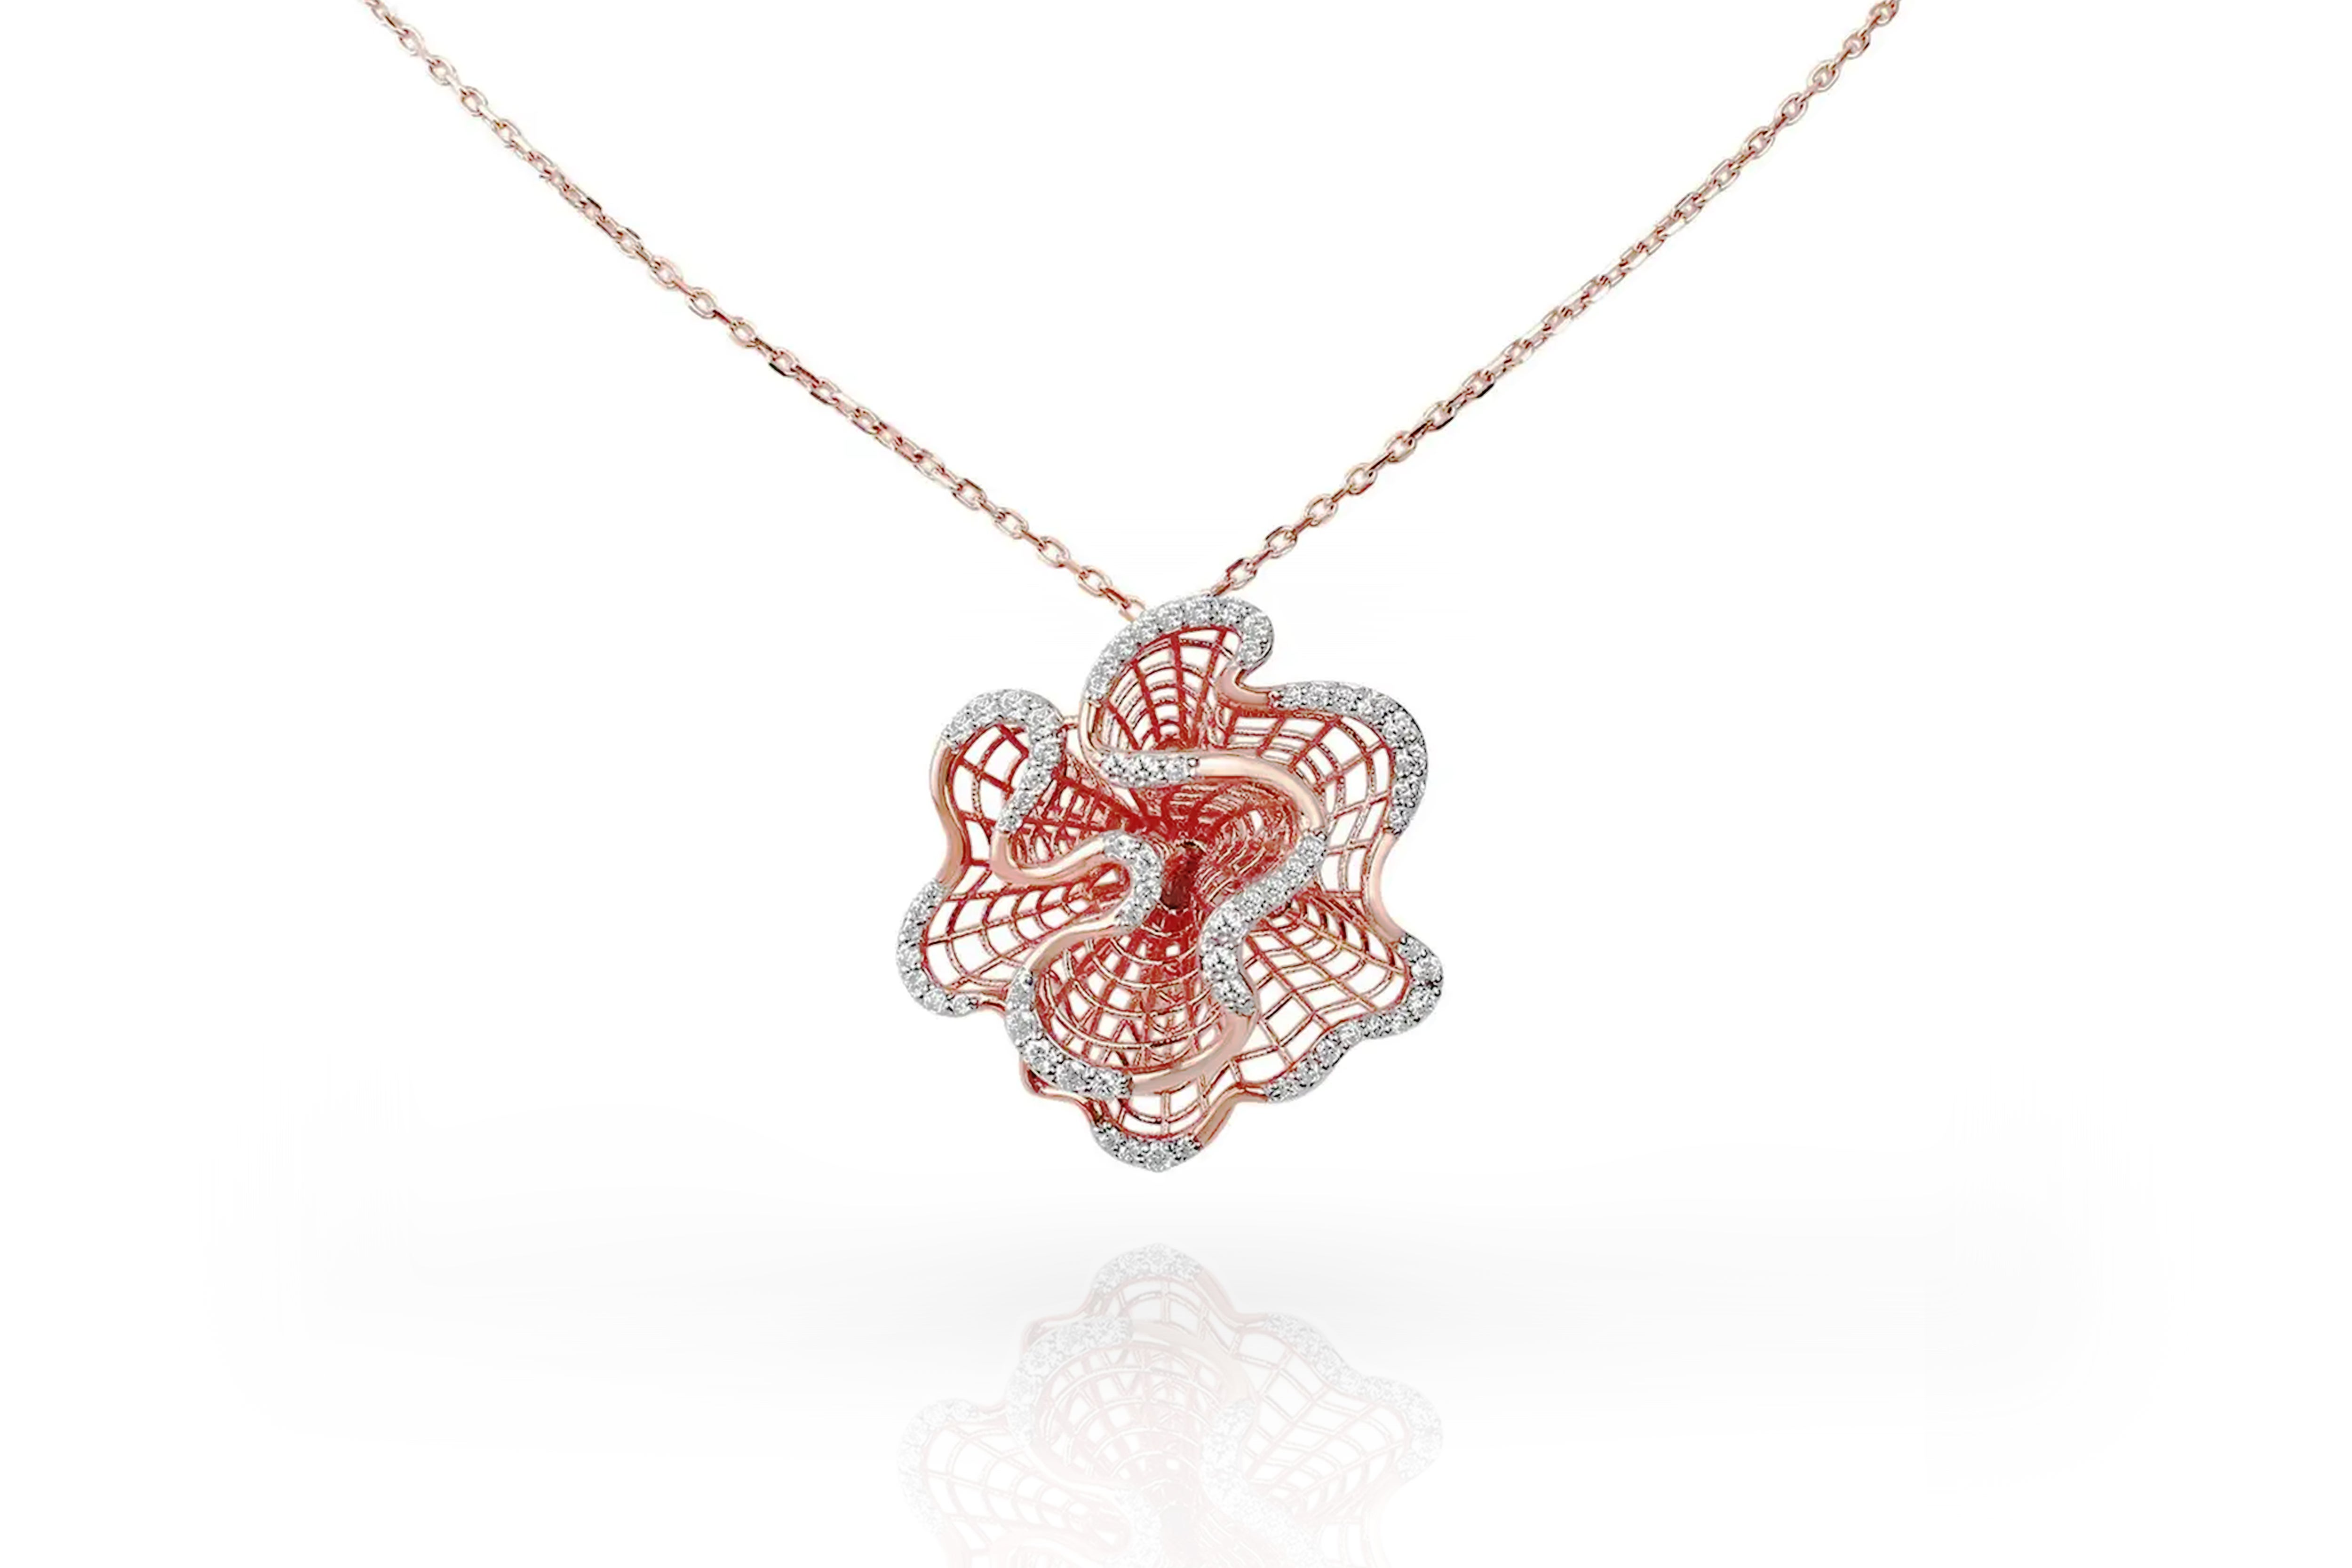 18 Karat Gold Pendant Necklace Two Tone White Gold Rose Gold Diamond Pave Floral For Sale